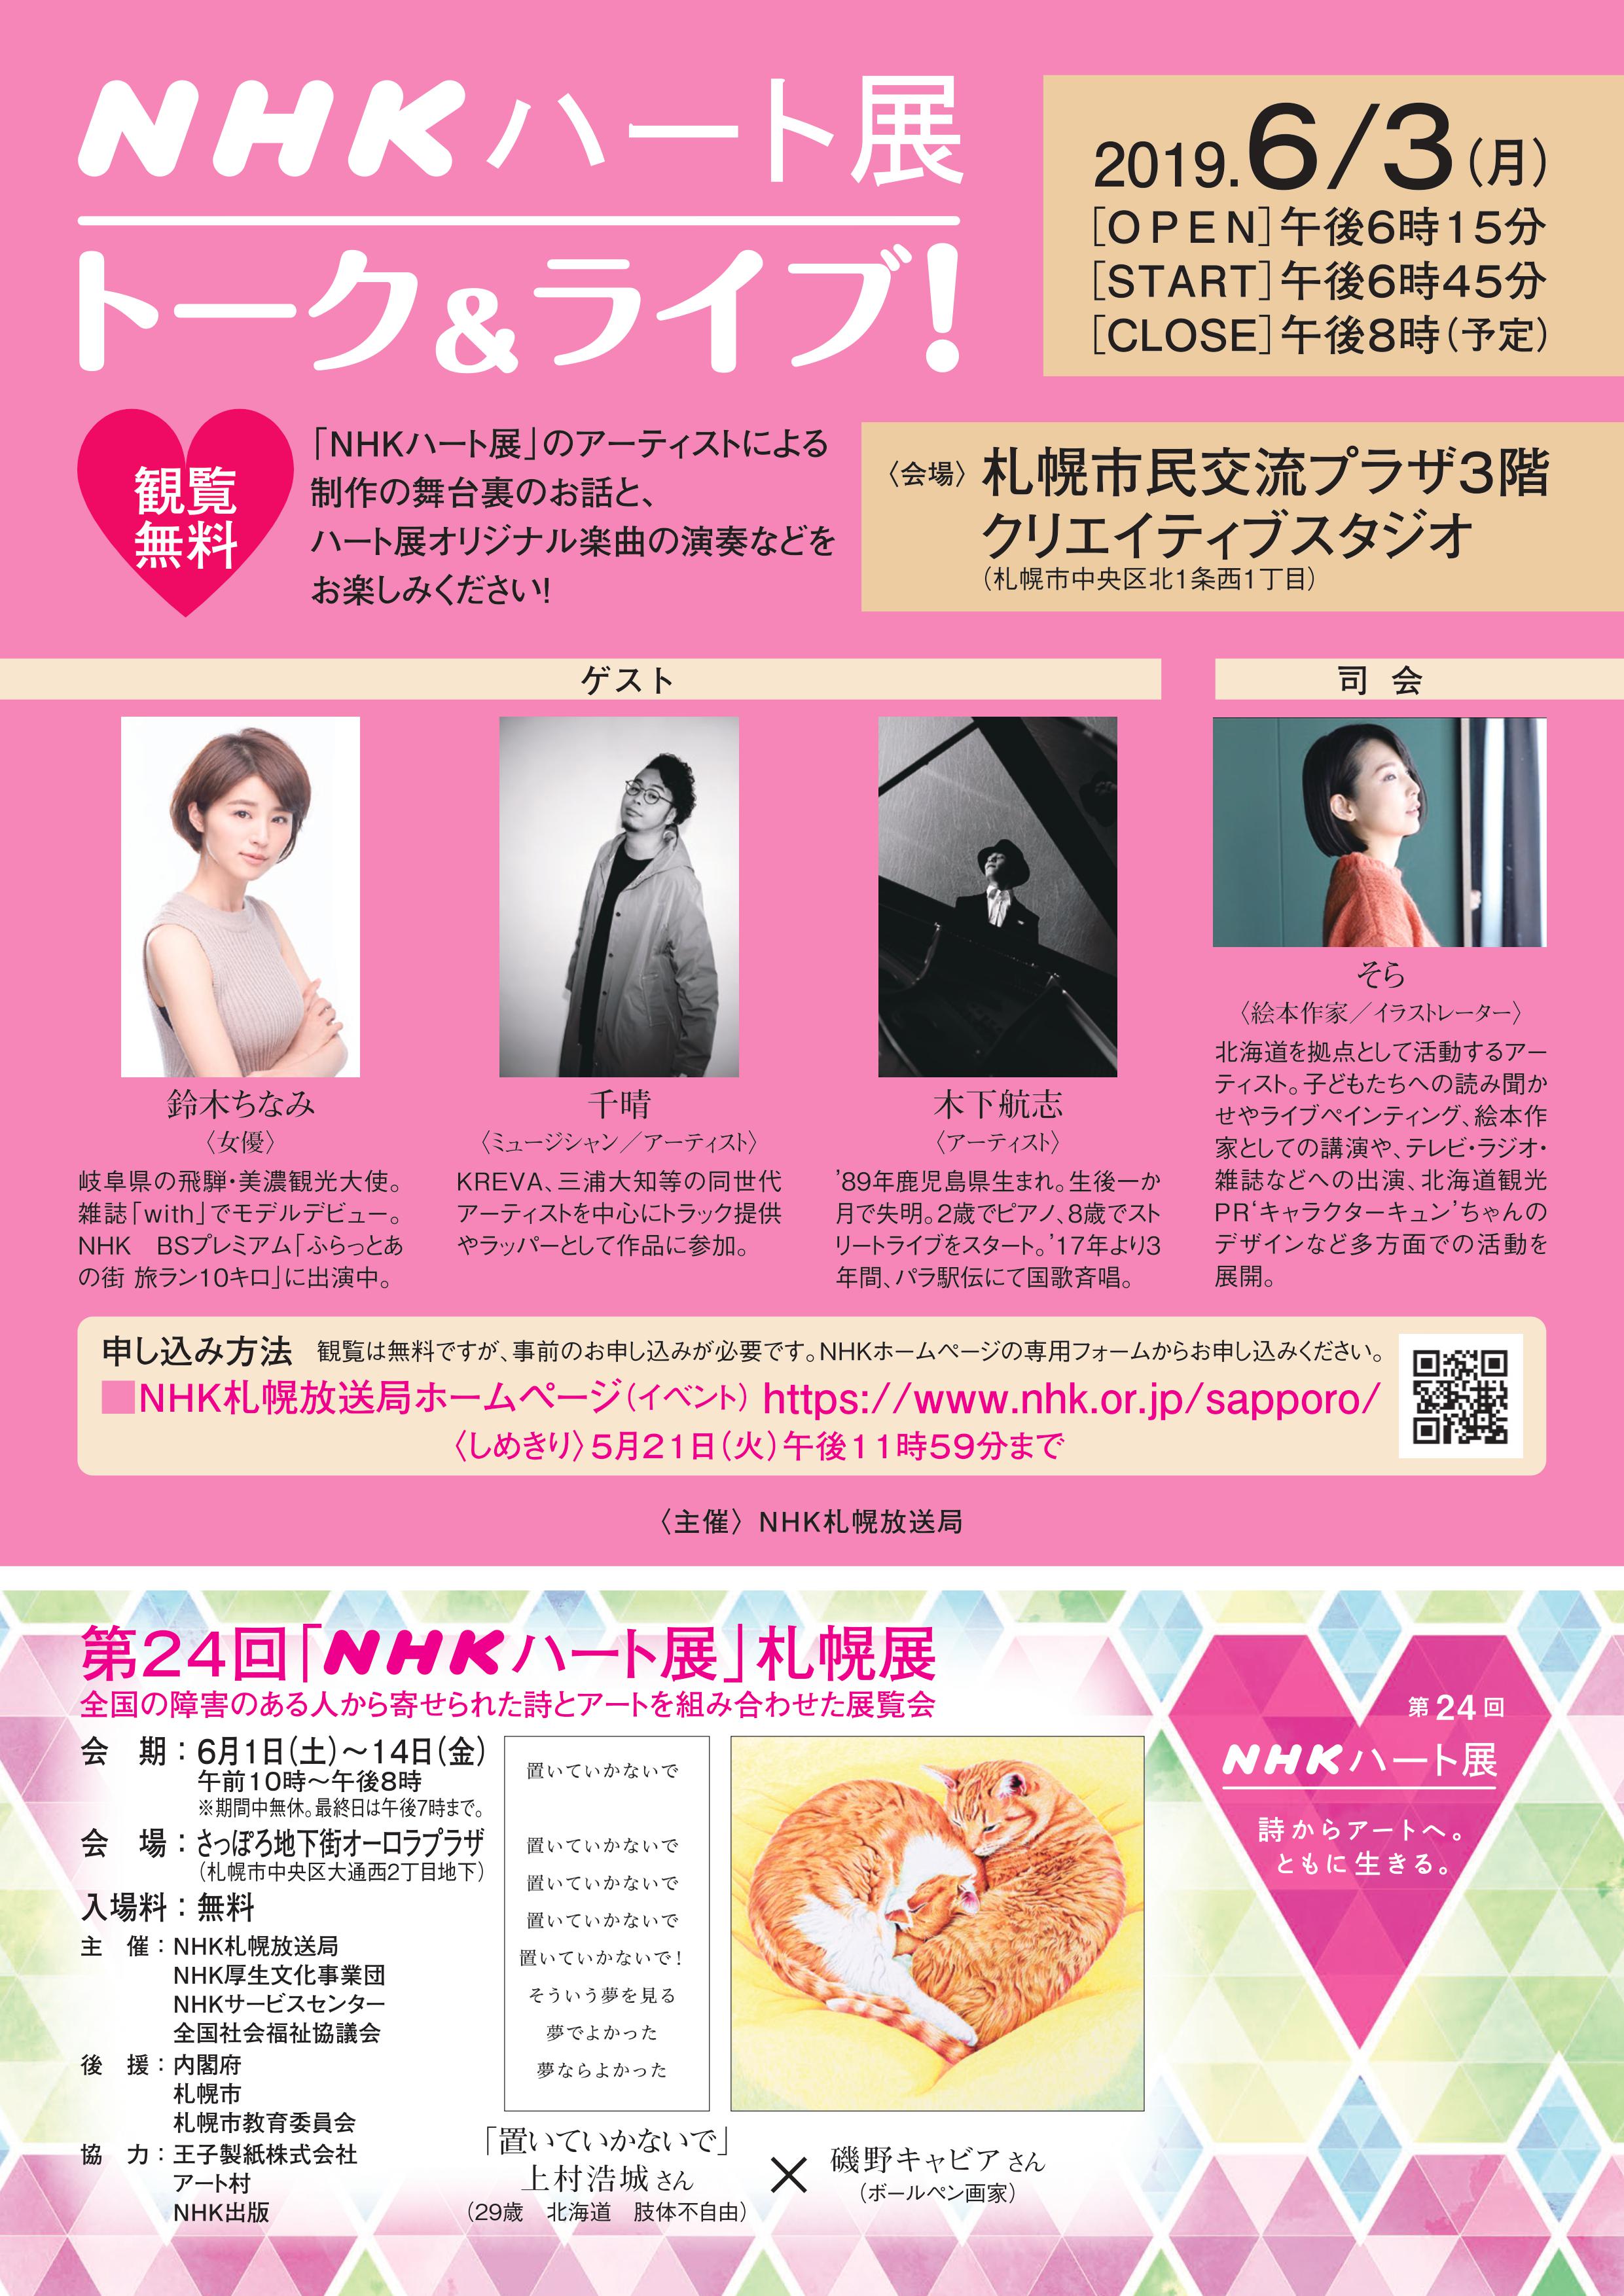 Nhk Heart Exhibition Public Discussion Live Music Performance Upcoming Events Sapporo Community Plaza